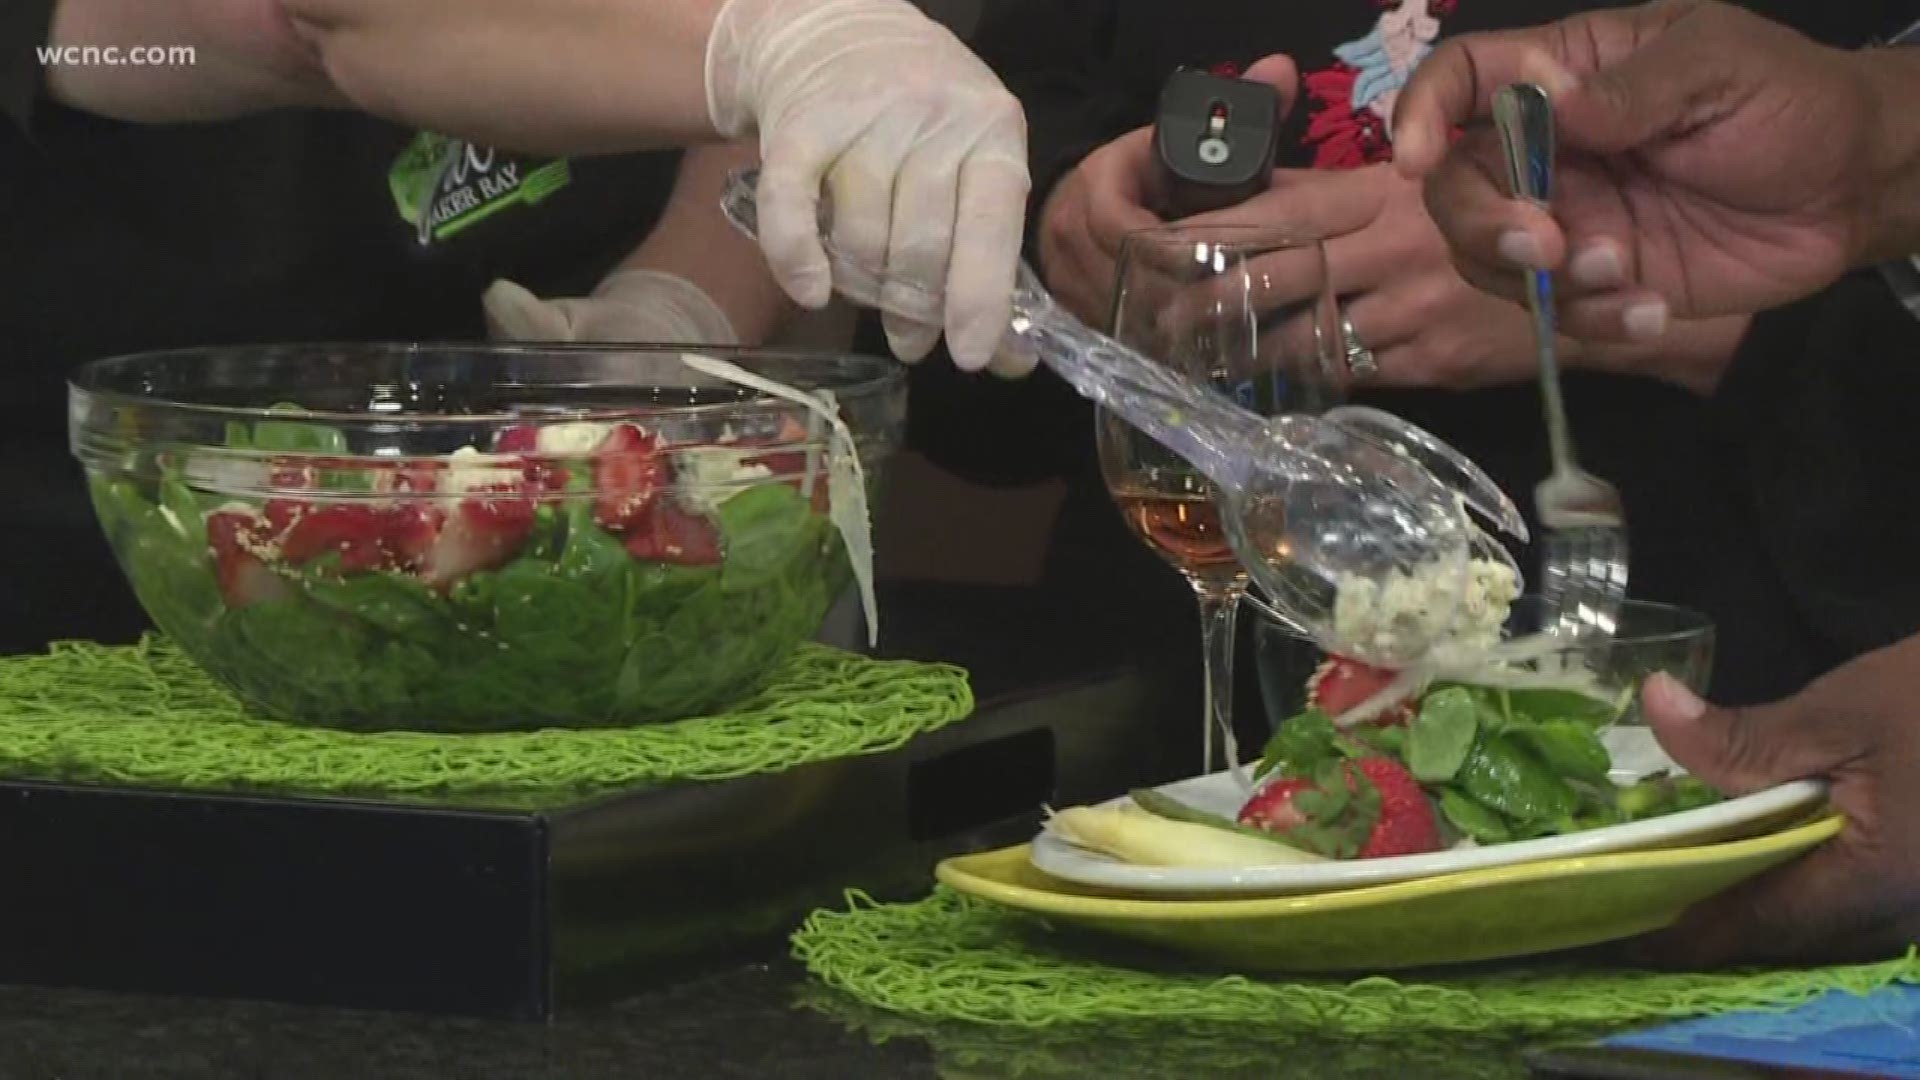 Chef Jill Aker Ray shows us how to throw together a bright salad and make a homemade poppyseed dressing in a Mason jar.